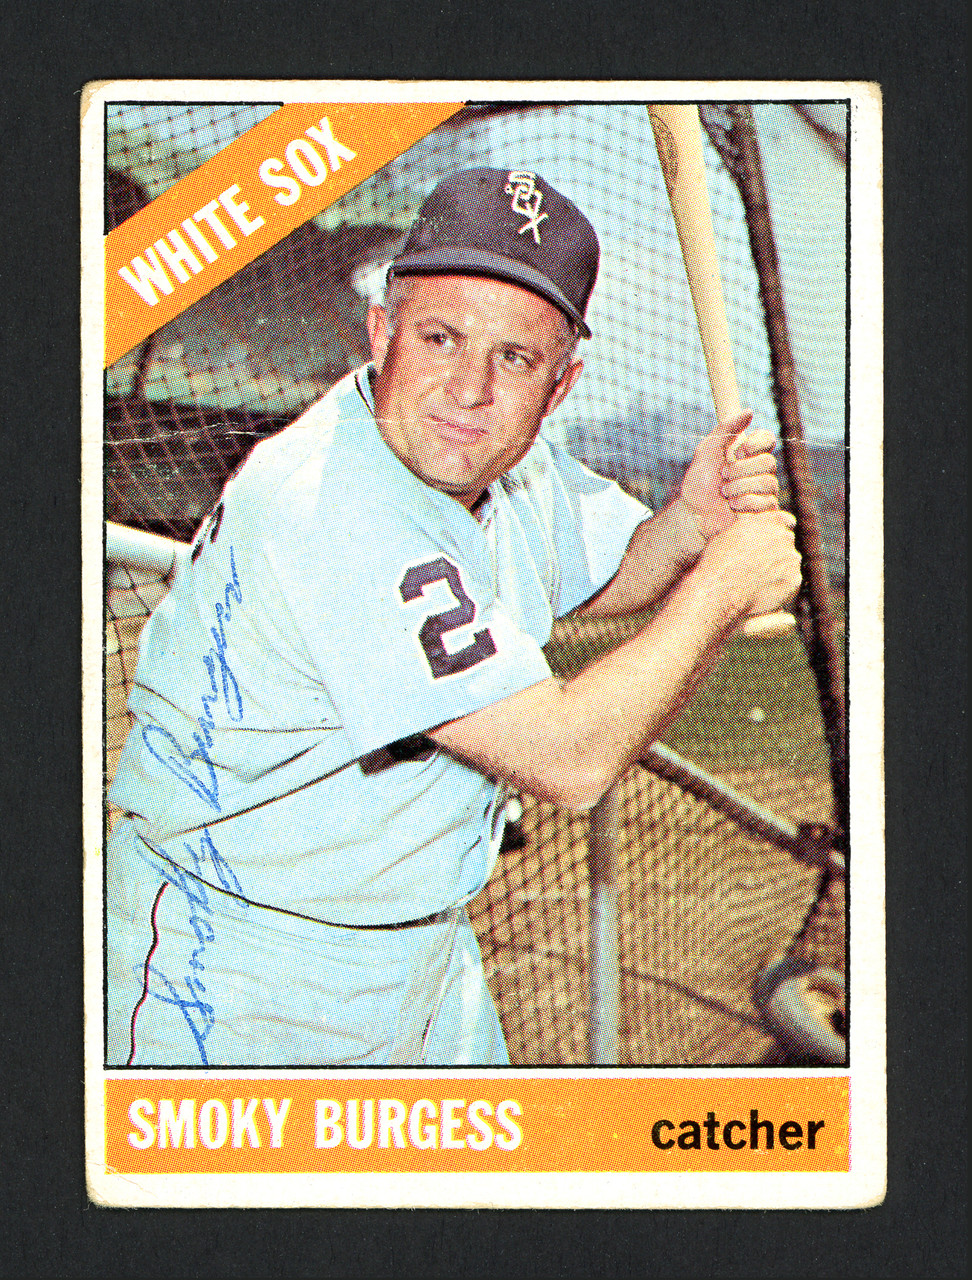 Smoky Burgess Autographed 1966 Topps Card #354 Chicago White Sox SKU #165453